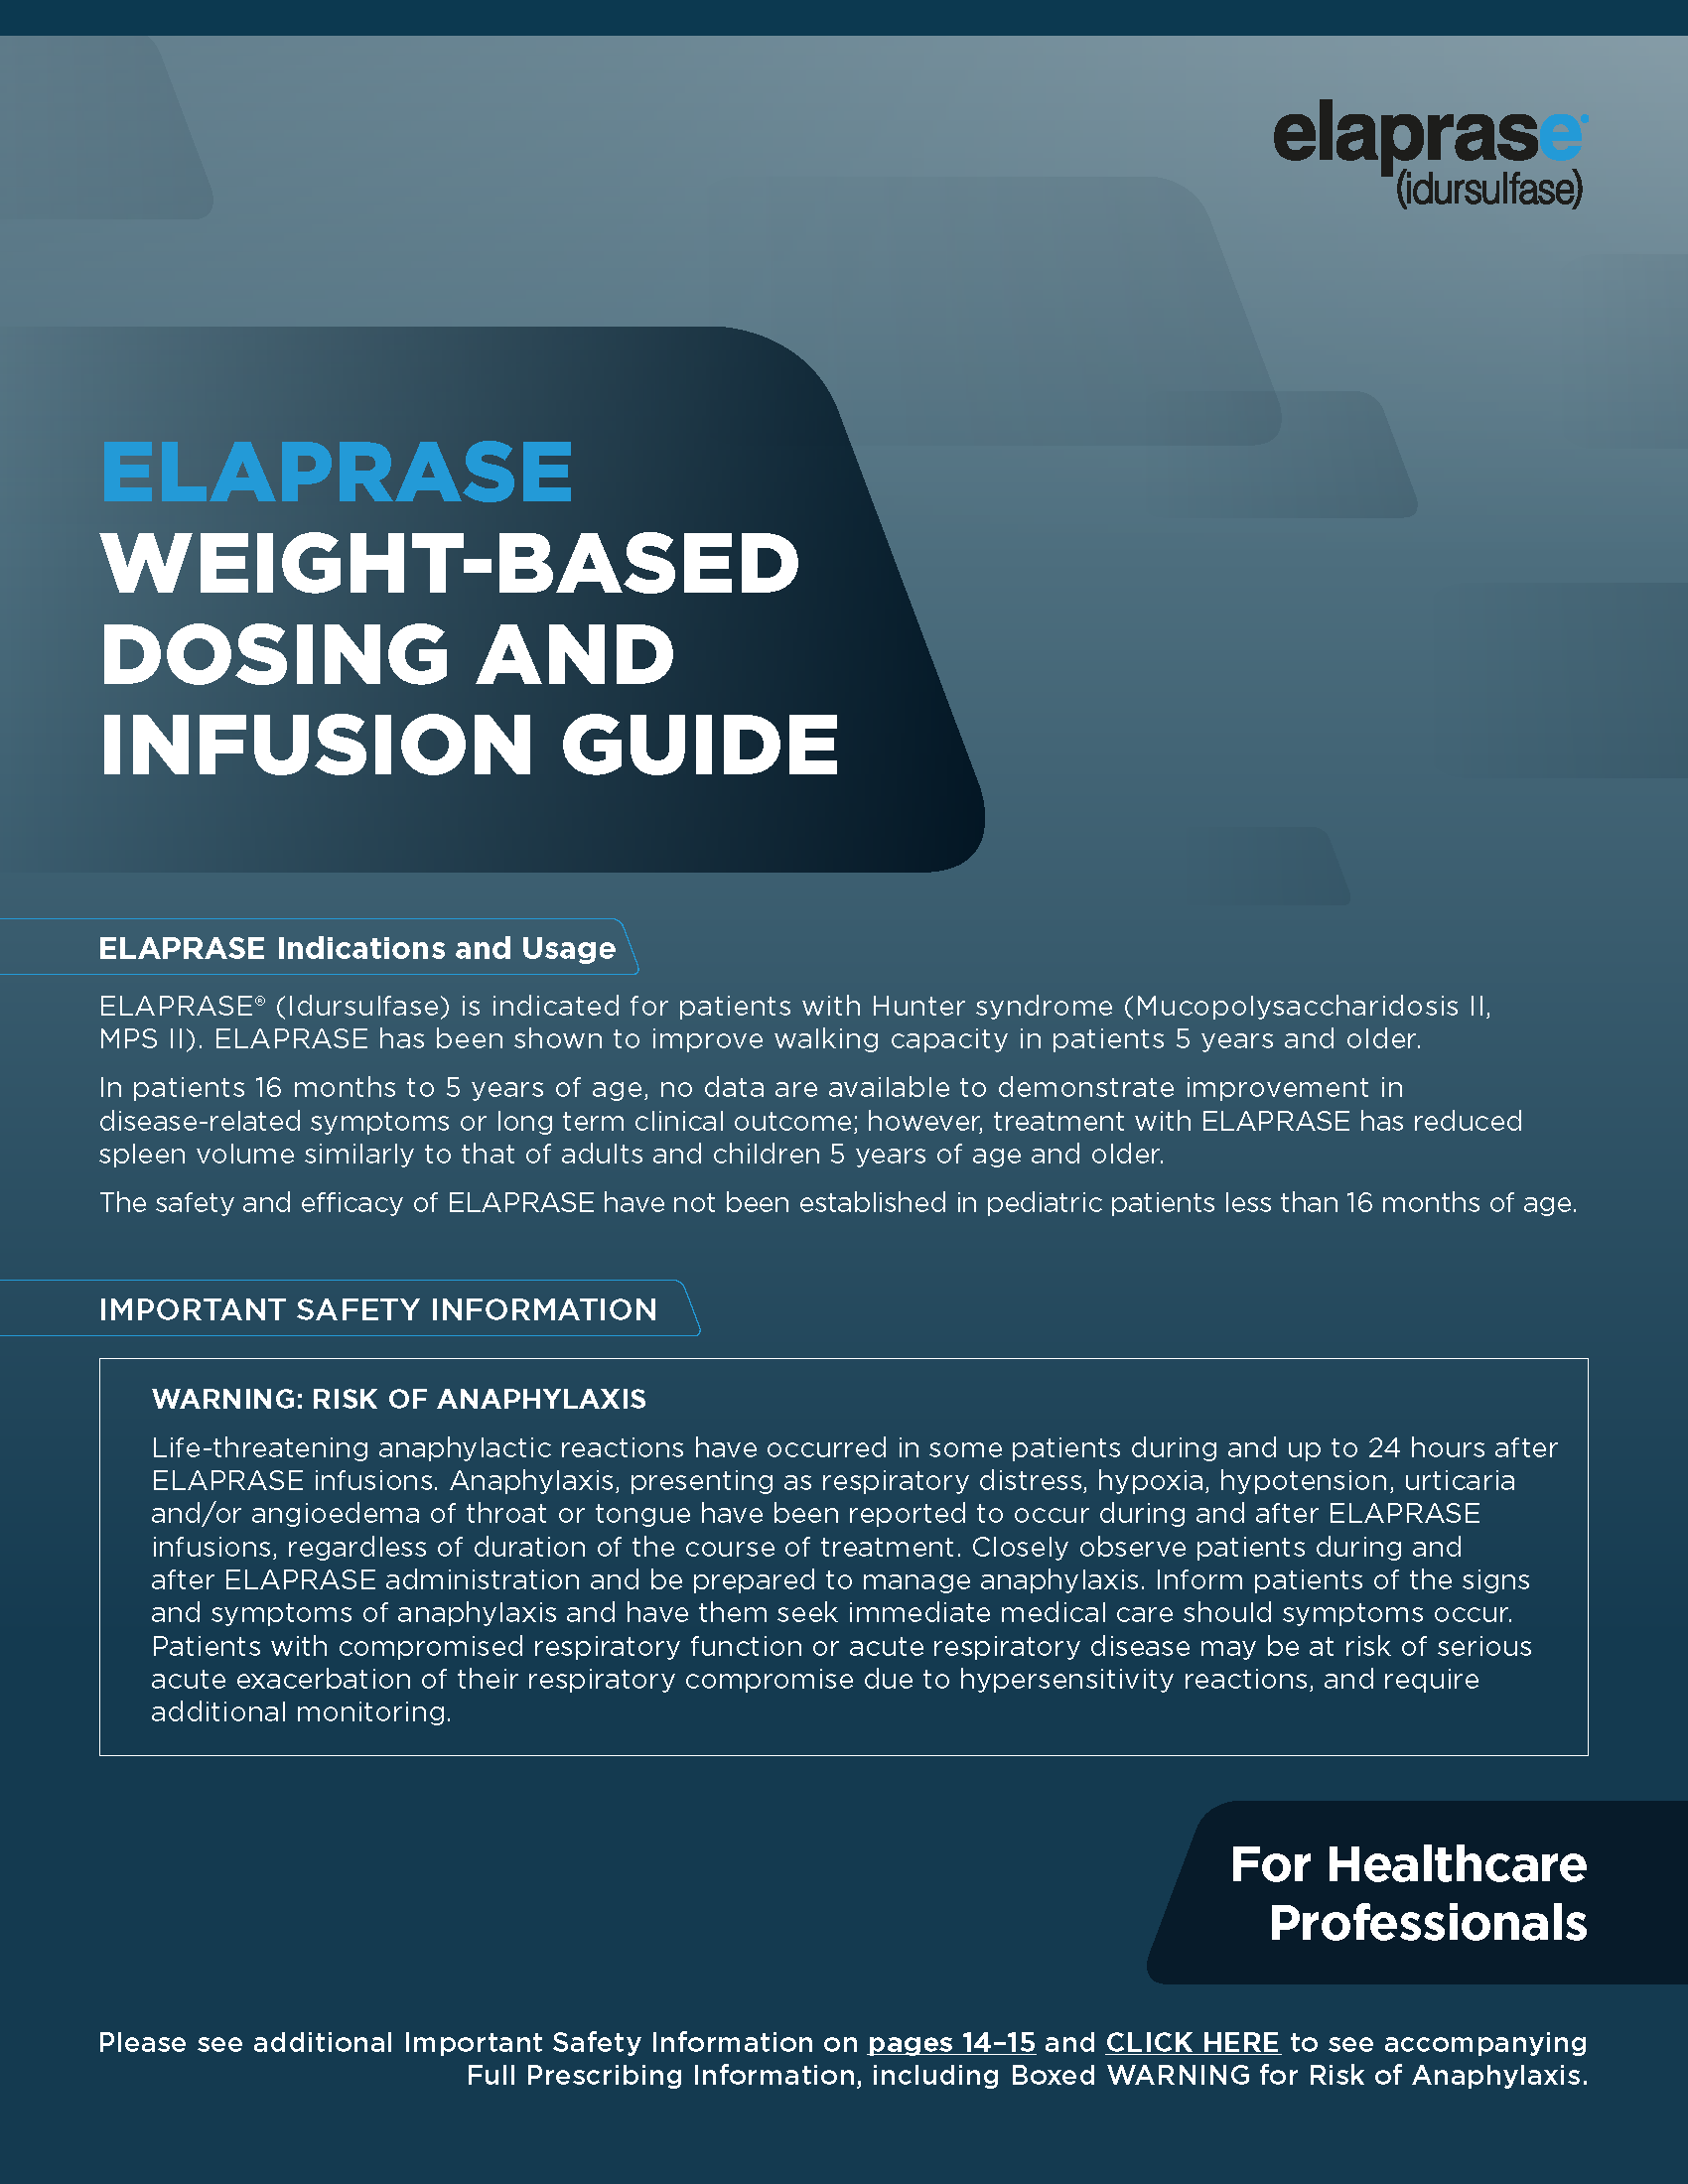 ELAPRASE Dosing and Infusion Guide